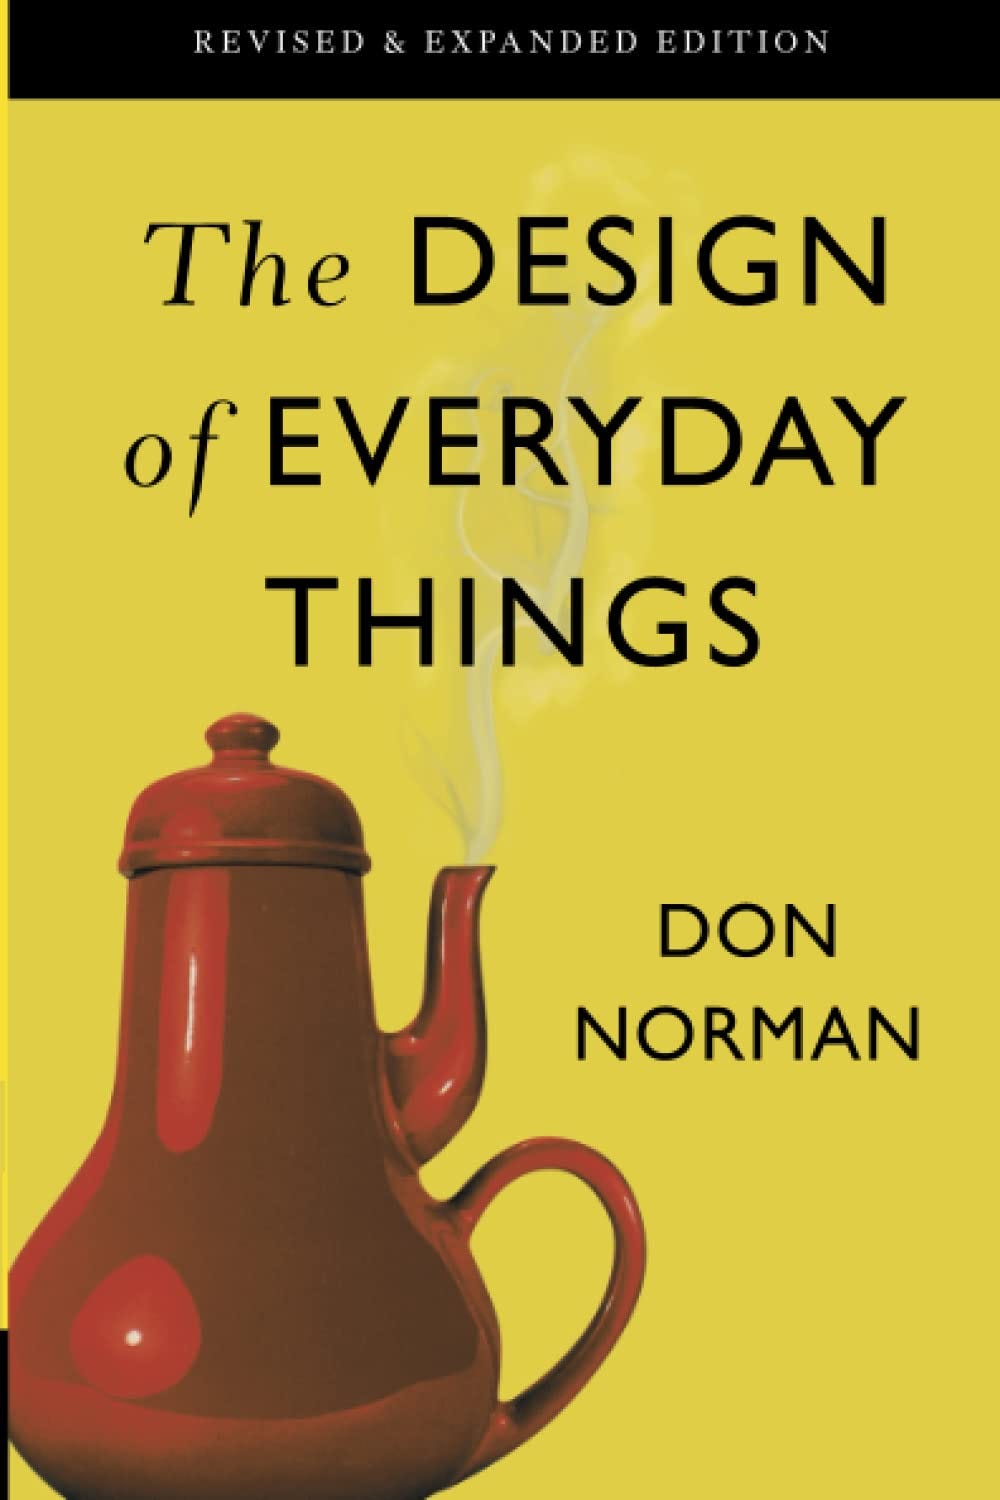 [PDF] The Design of Everyday Things By Donald A. Norman